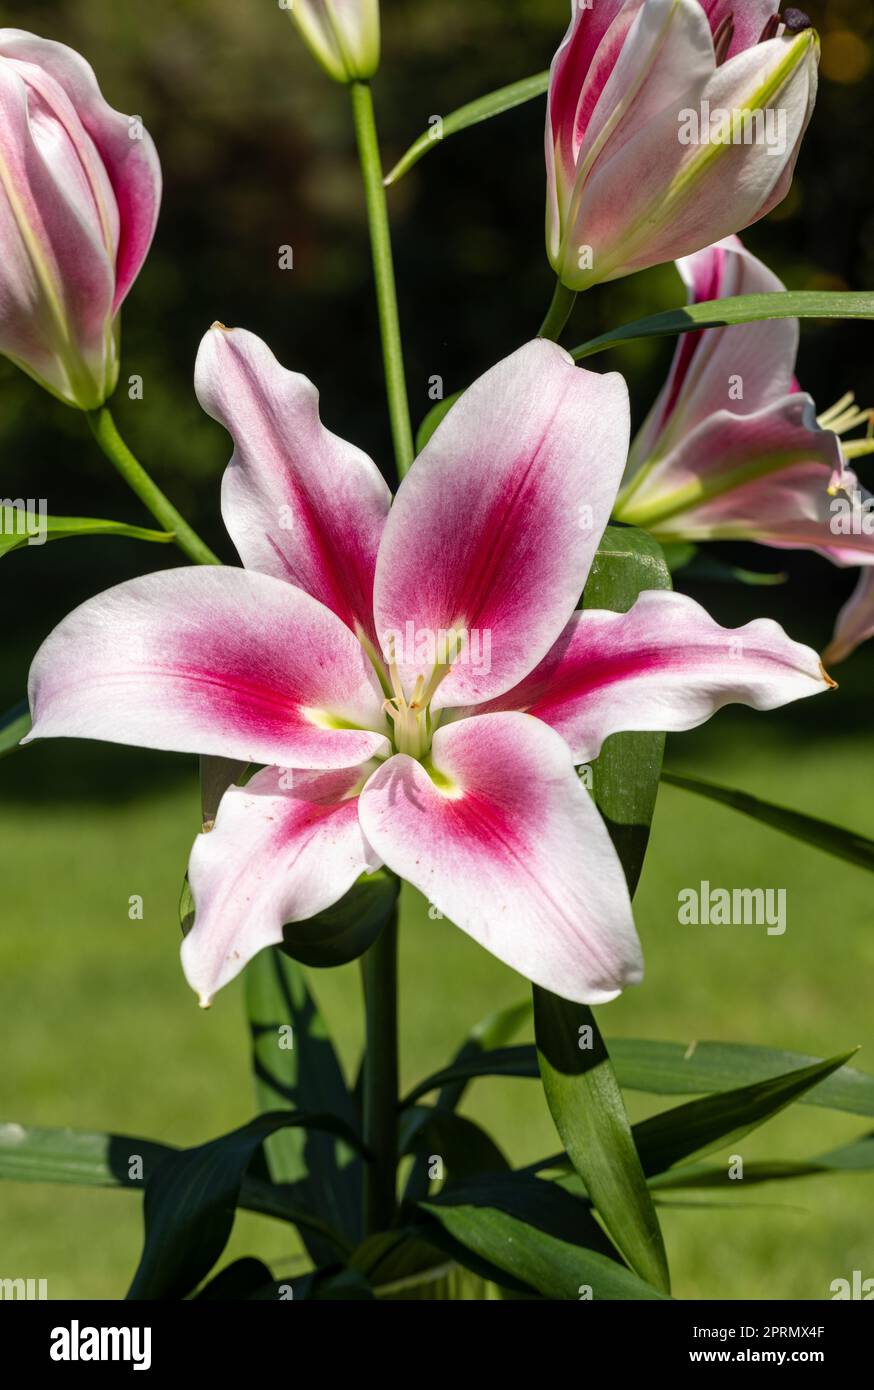 White and Red lily in the summer garden. Stock Photo